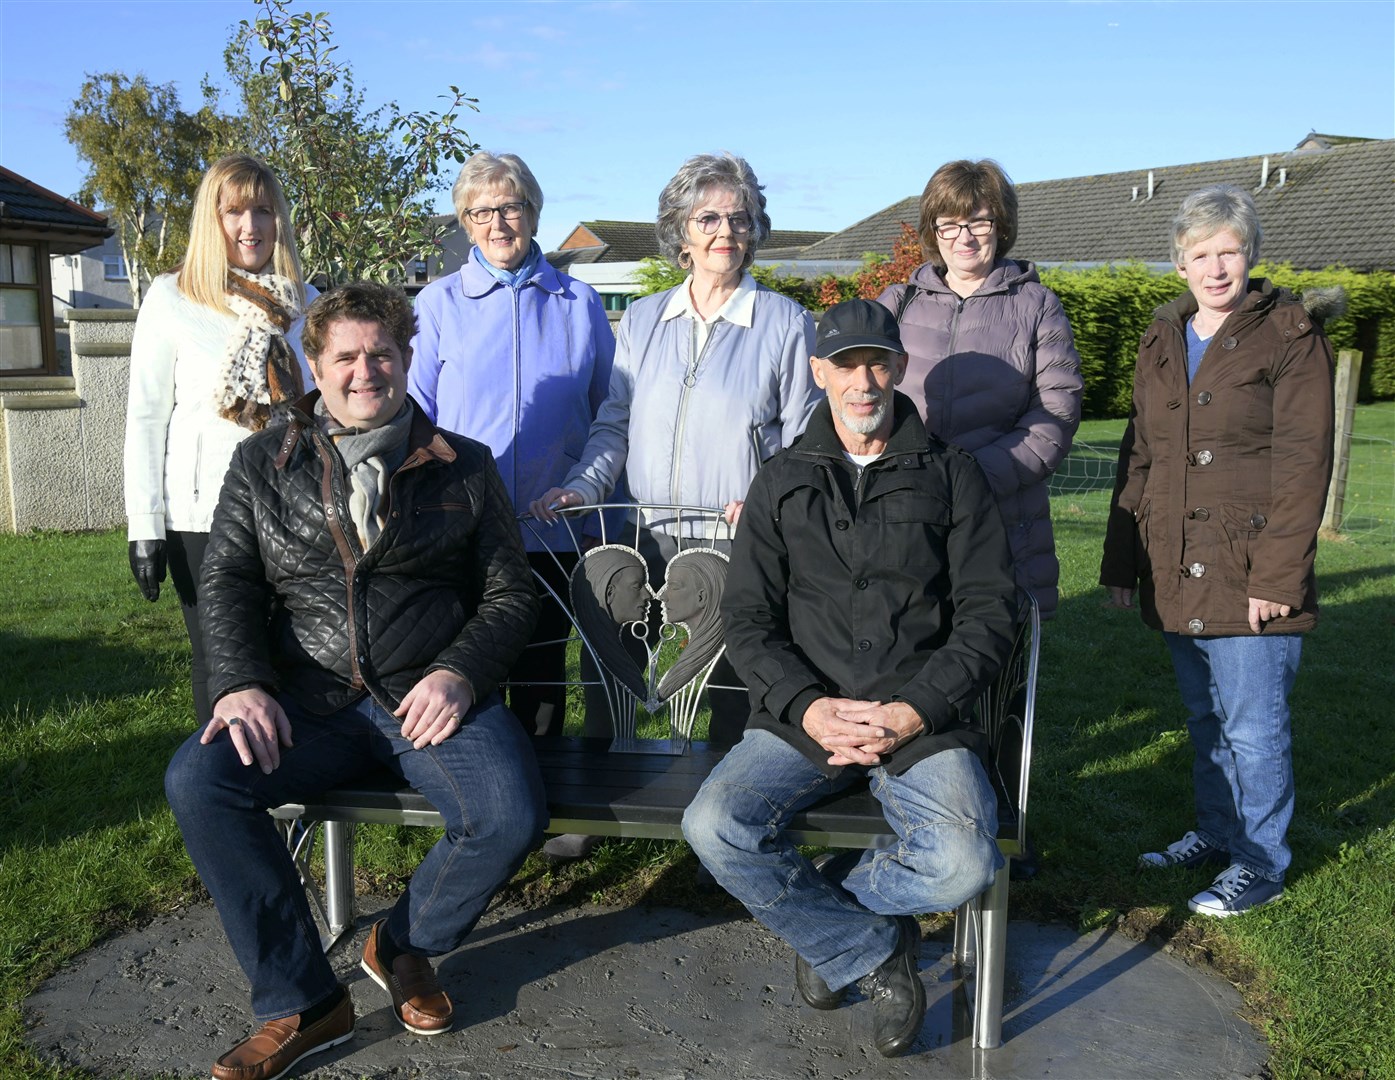 (Seated, from left) Colin Mackay and Carn Standing, (back, from left) Lynne Sutherland, Cathleen Craib (Mr McKay's sister), Sybil McKay (Mr McKay's widow), Diane Gilbertson and Vivien Goodall (House of Hair Fashion). Picture: Beth Taylor